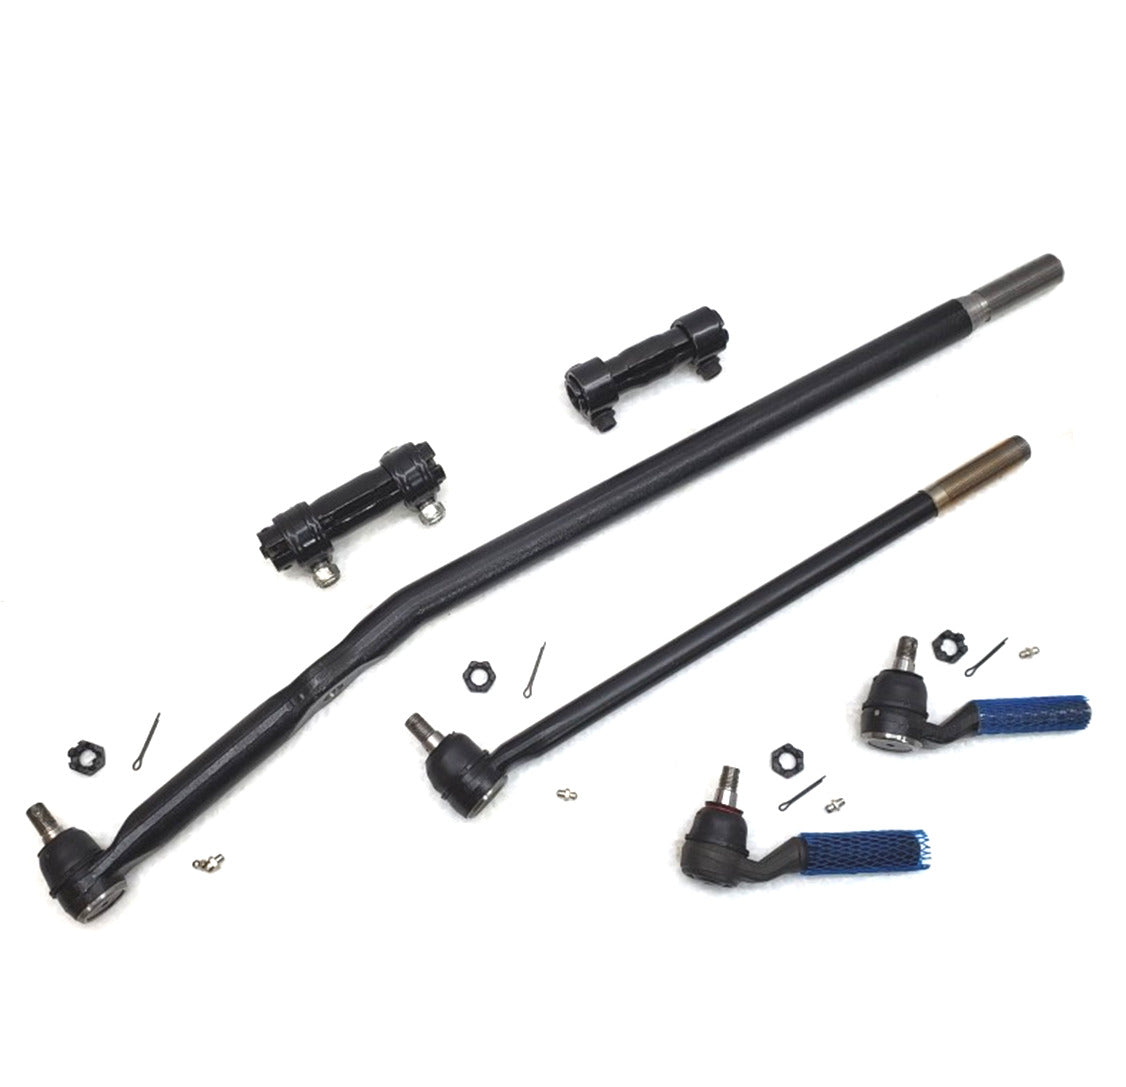 HD Tie Rod Drag Link Adjusting Sleeve Steering Kit for 1995-1997 Ford F250HD 4x4, Twin I Beam